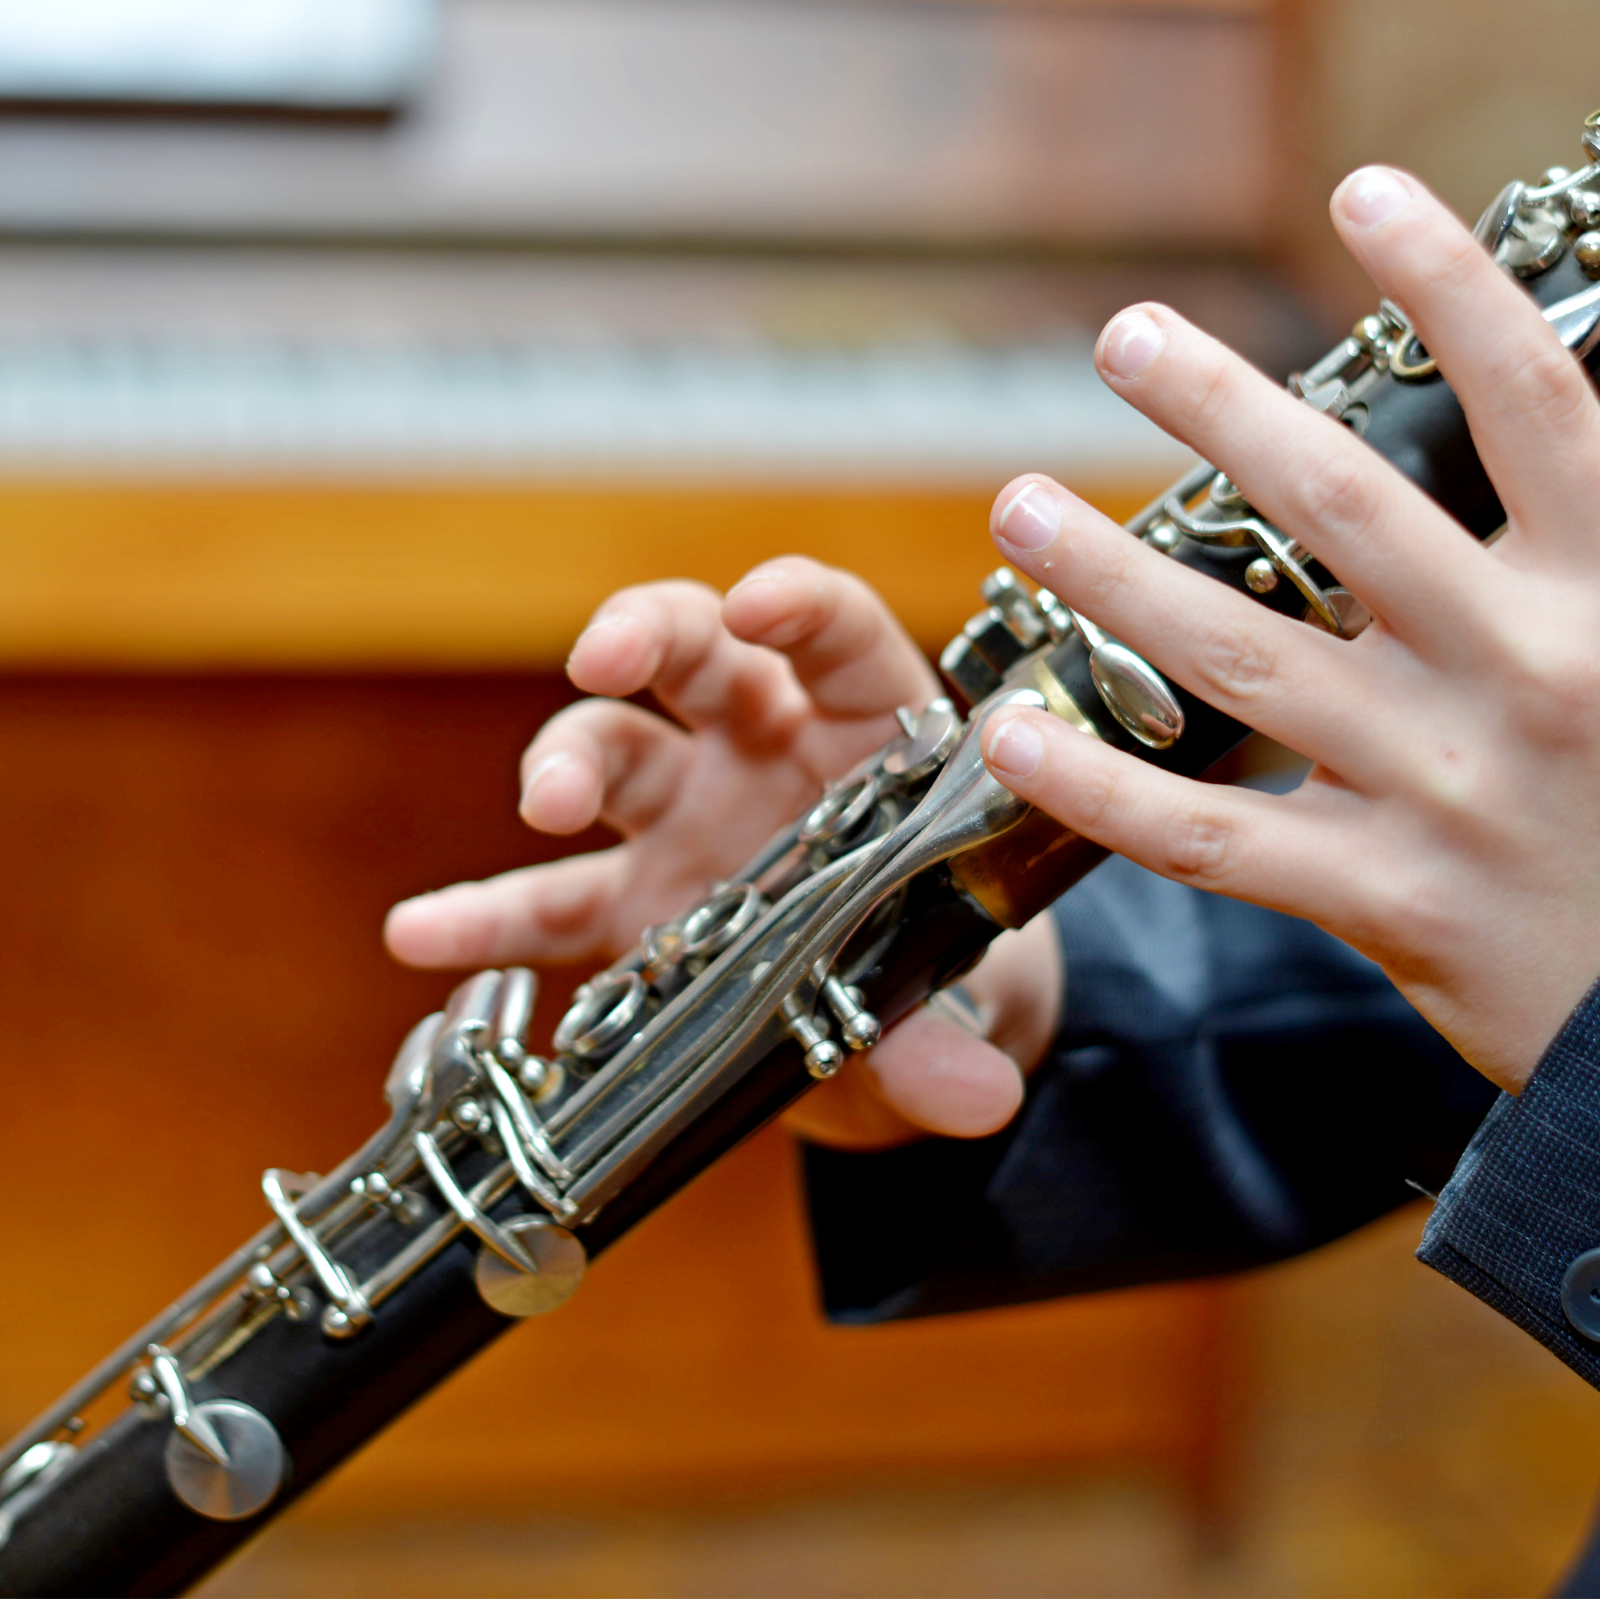 Adult clarinet lesson 45 minutes : photo 1